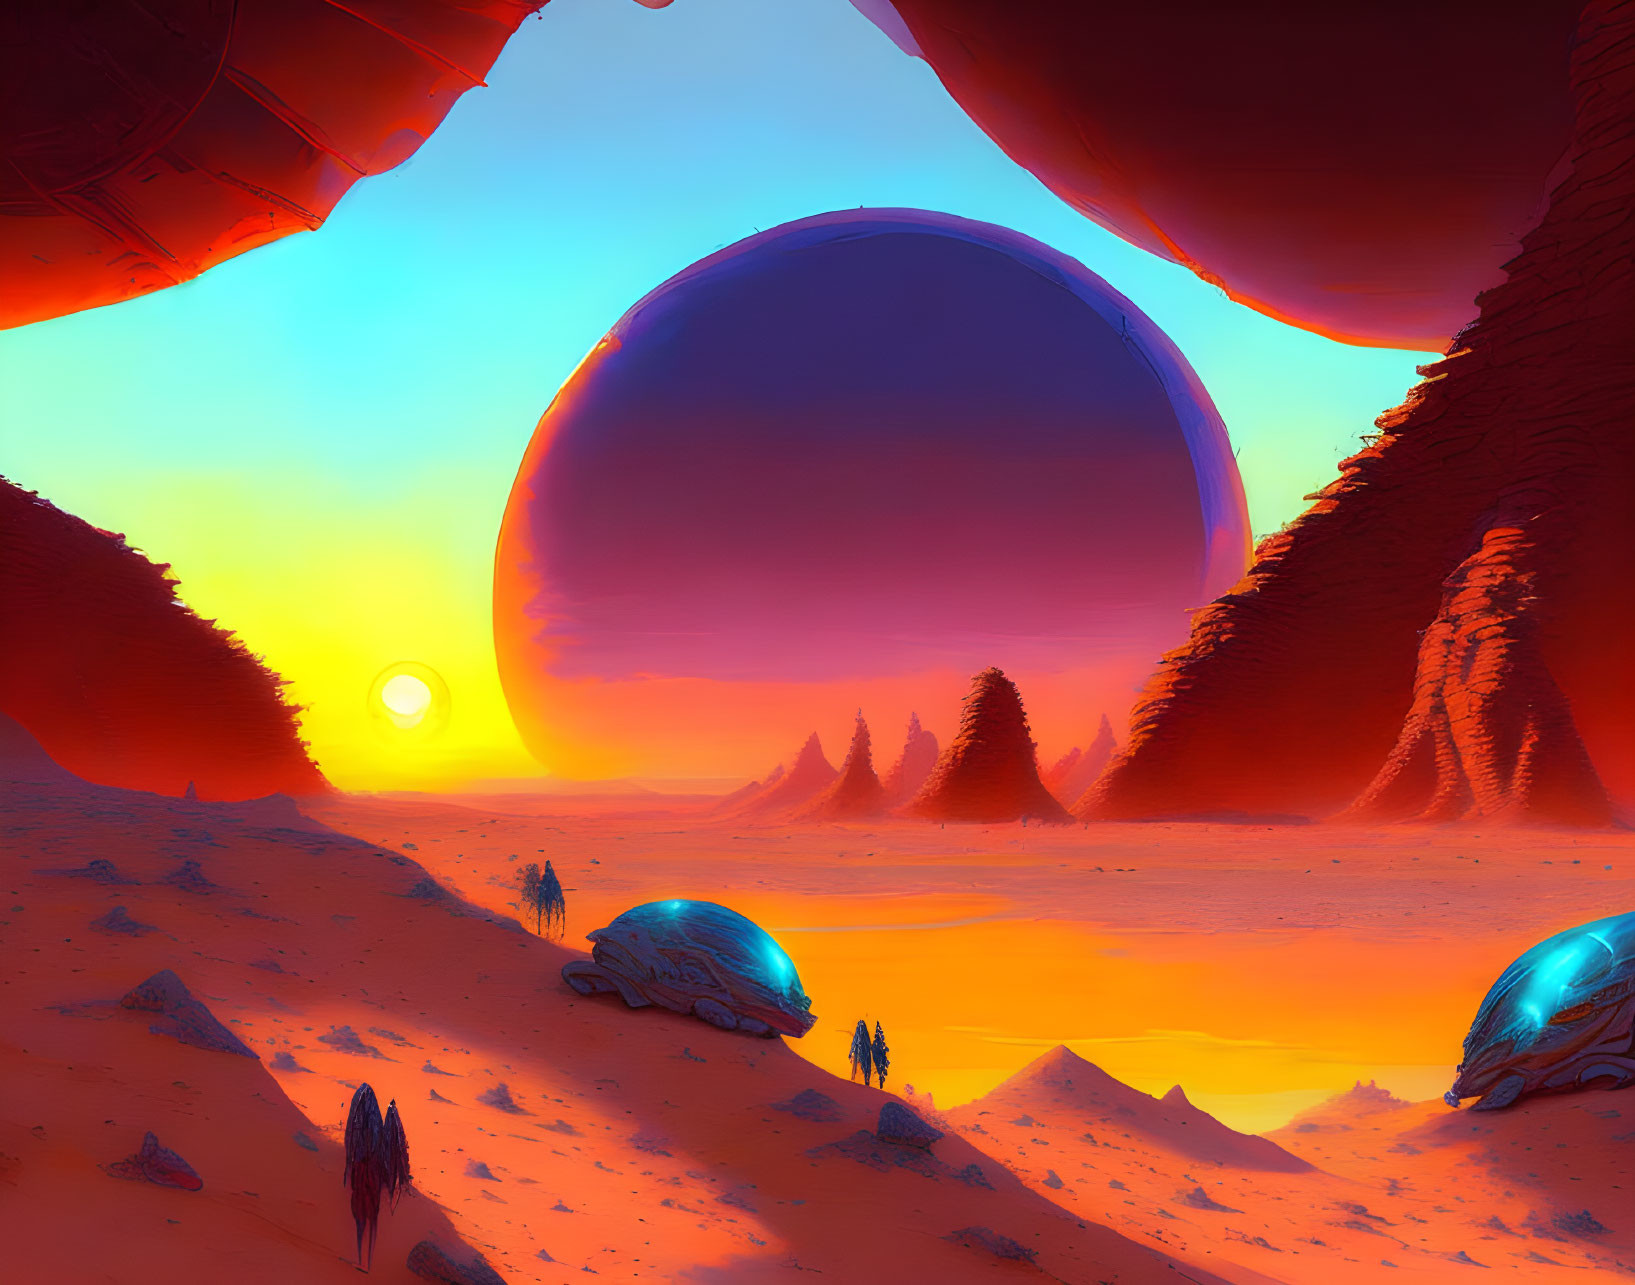 Futuristic sci-fi landscape with red cliffs, alien moon, and radiant sunset